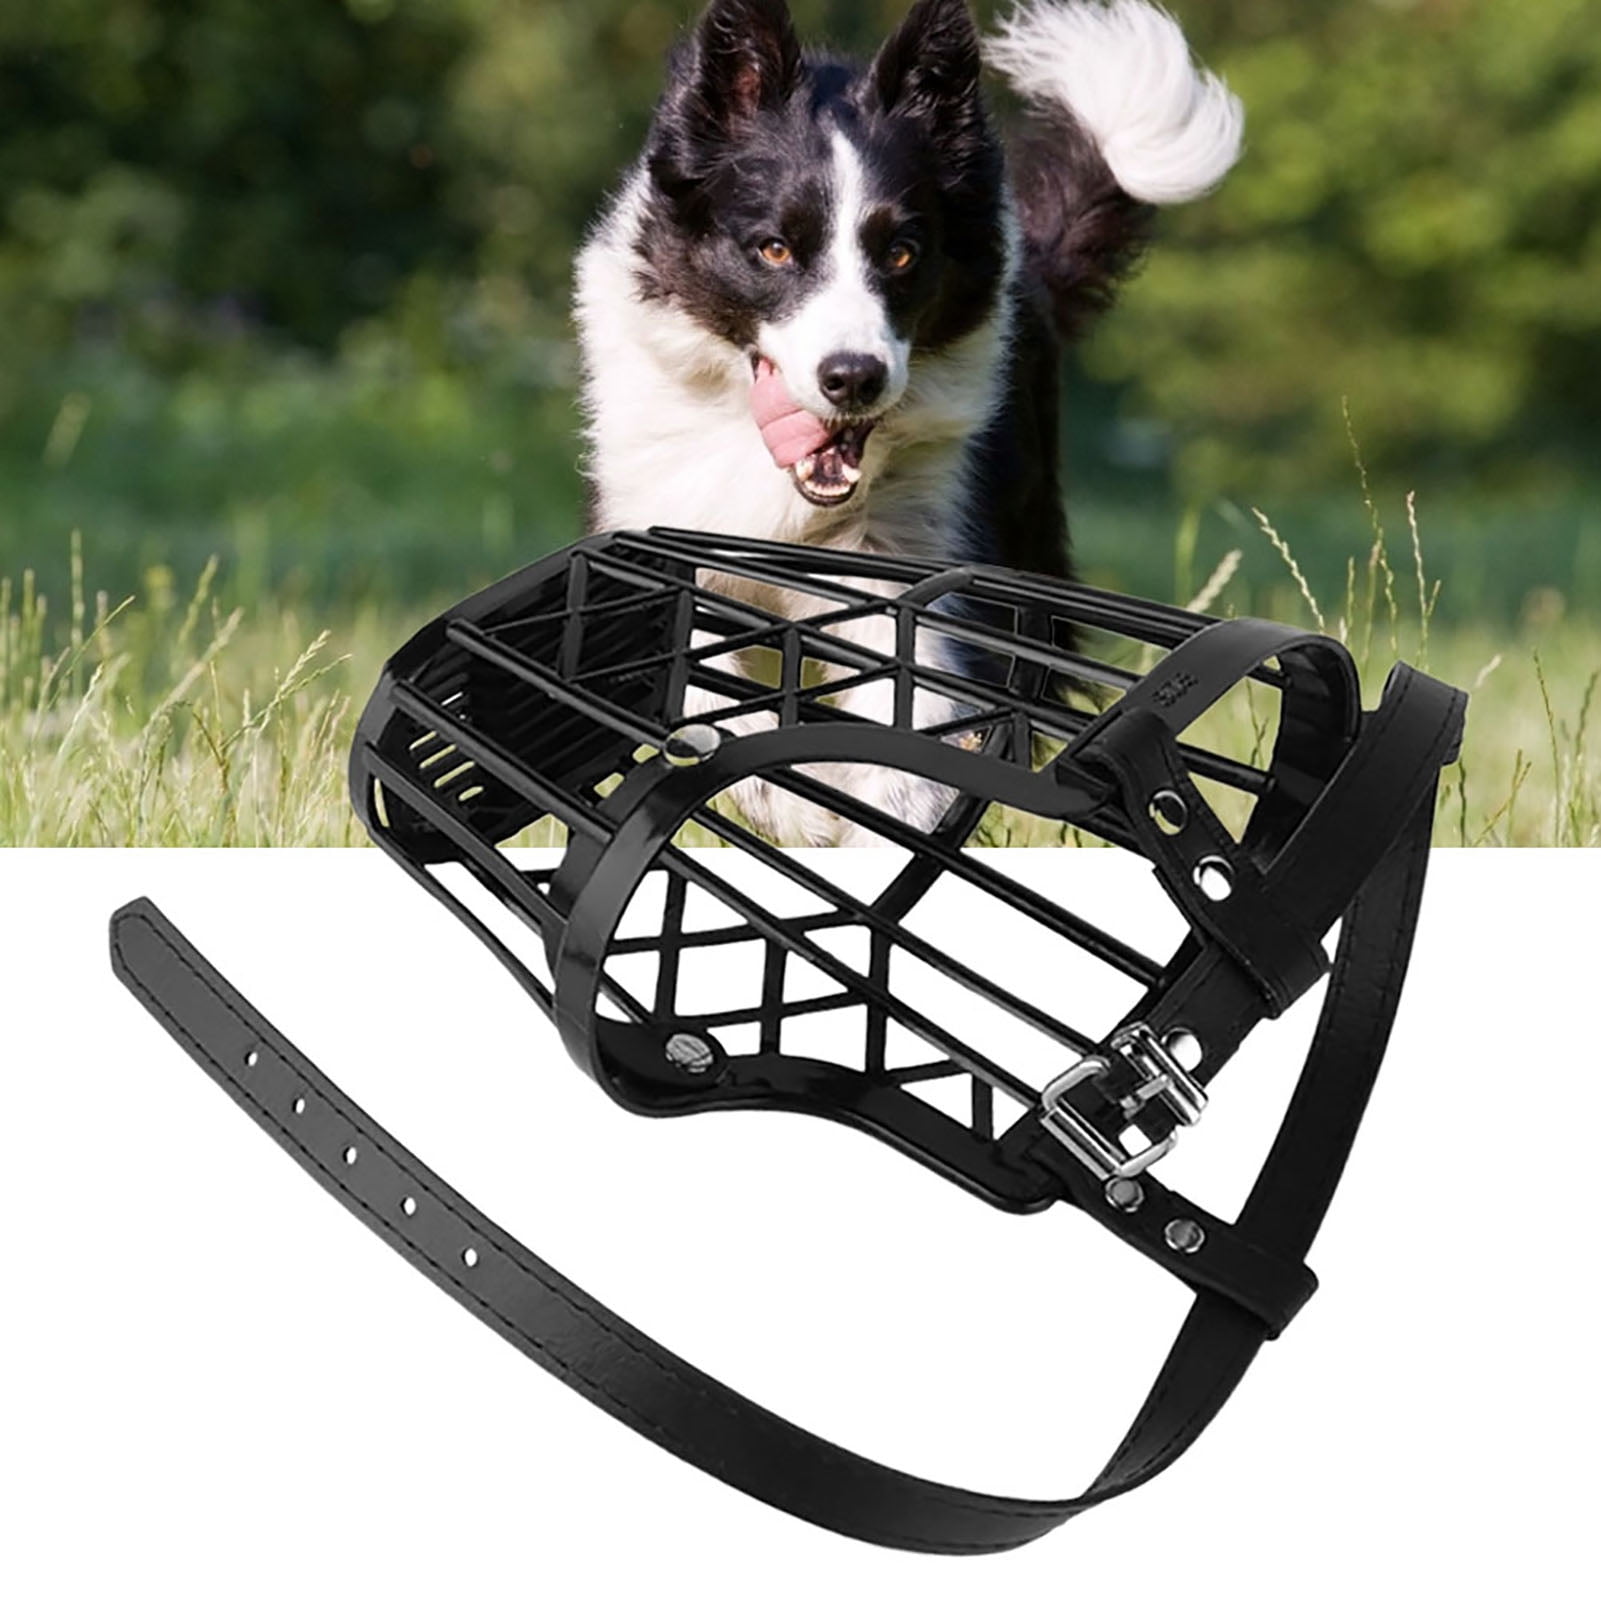 Large and X-Large Dogs Dog Muzzle Barking and Chewing Medium Stop Biting Best for Aggressive Dogs Breathable Basket Muzzles for Small 